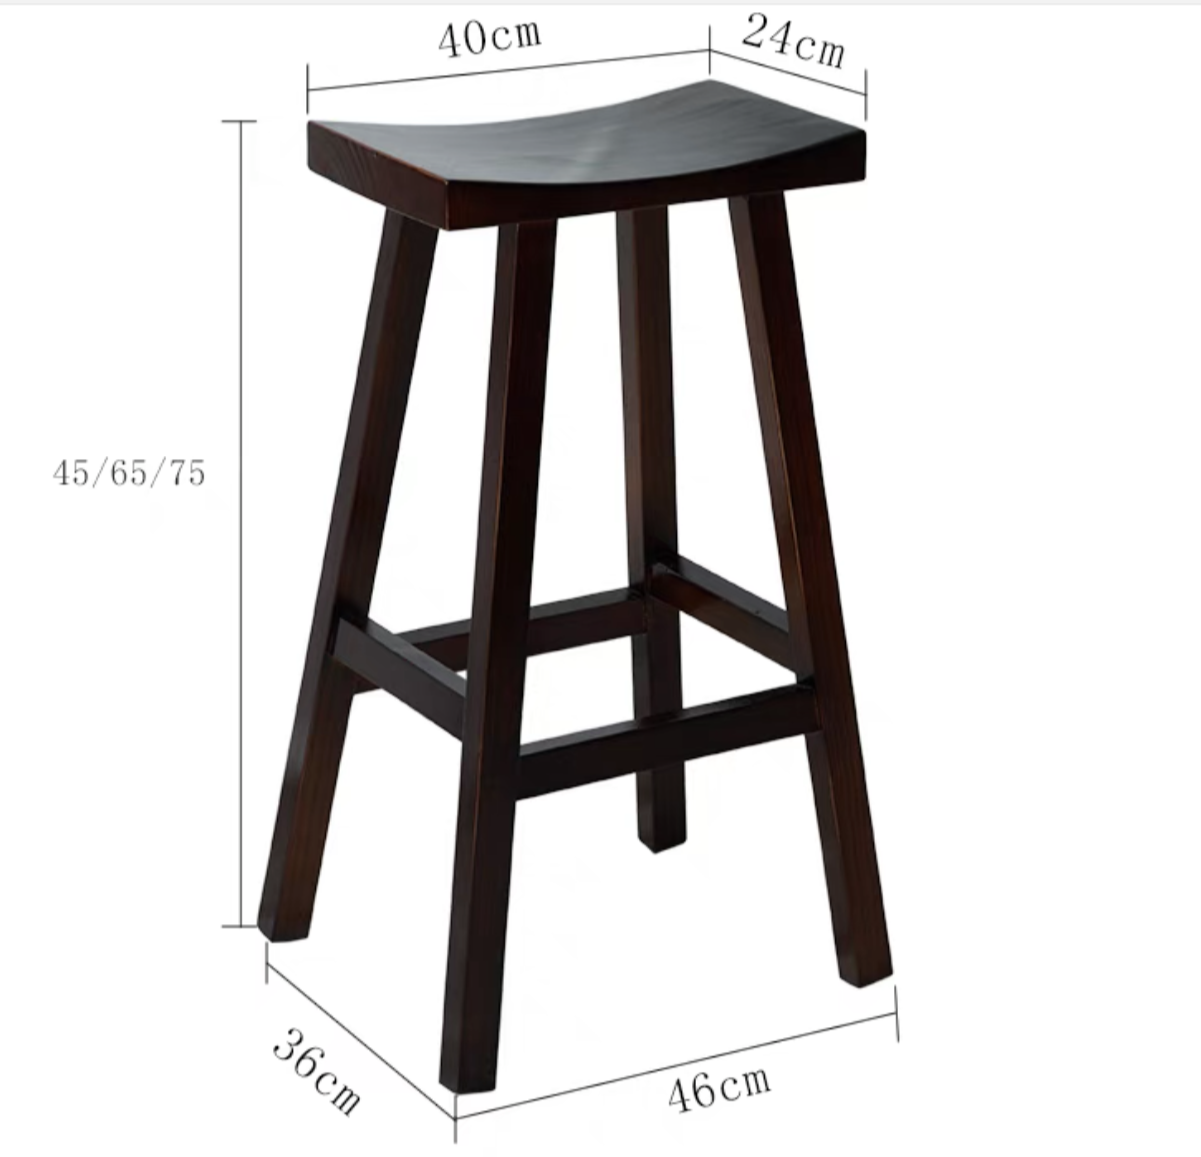 Luca High Bar Stool Solid Wood Saddle High Chair Cafe BR 067 WD